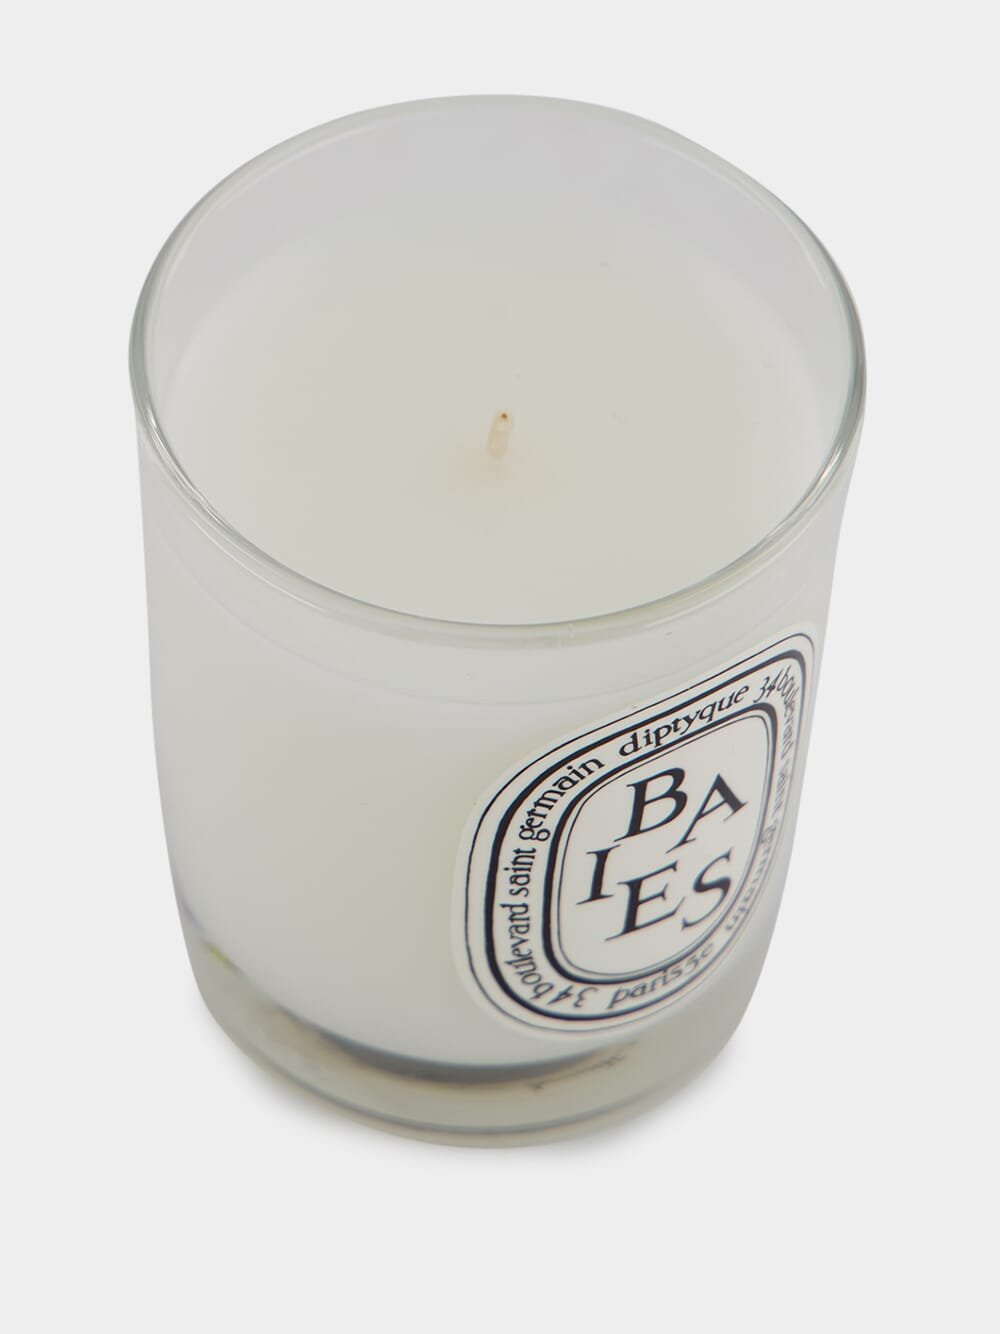 DiptyqueBaies Candle 70g at Fashion Clinic